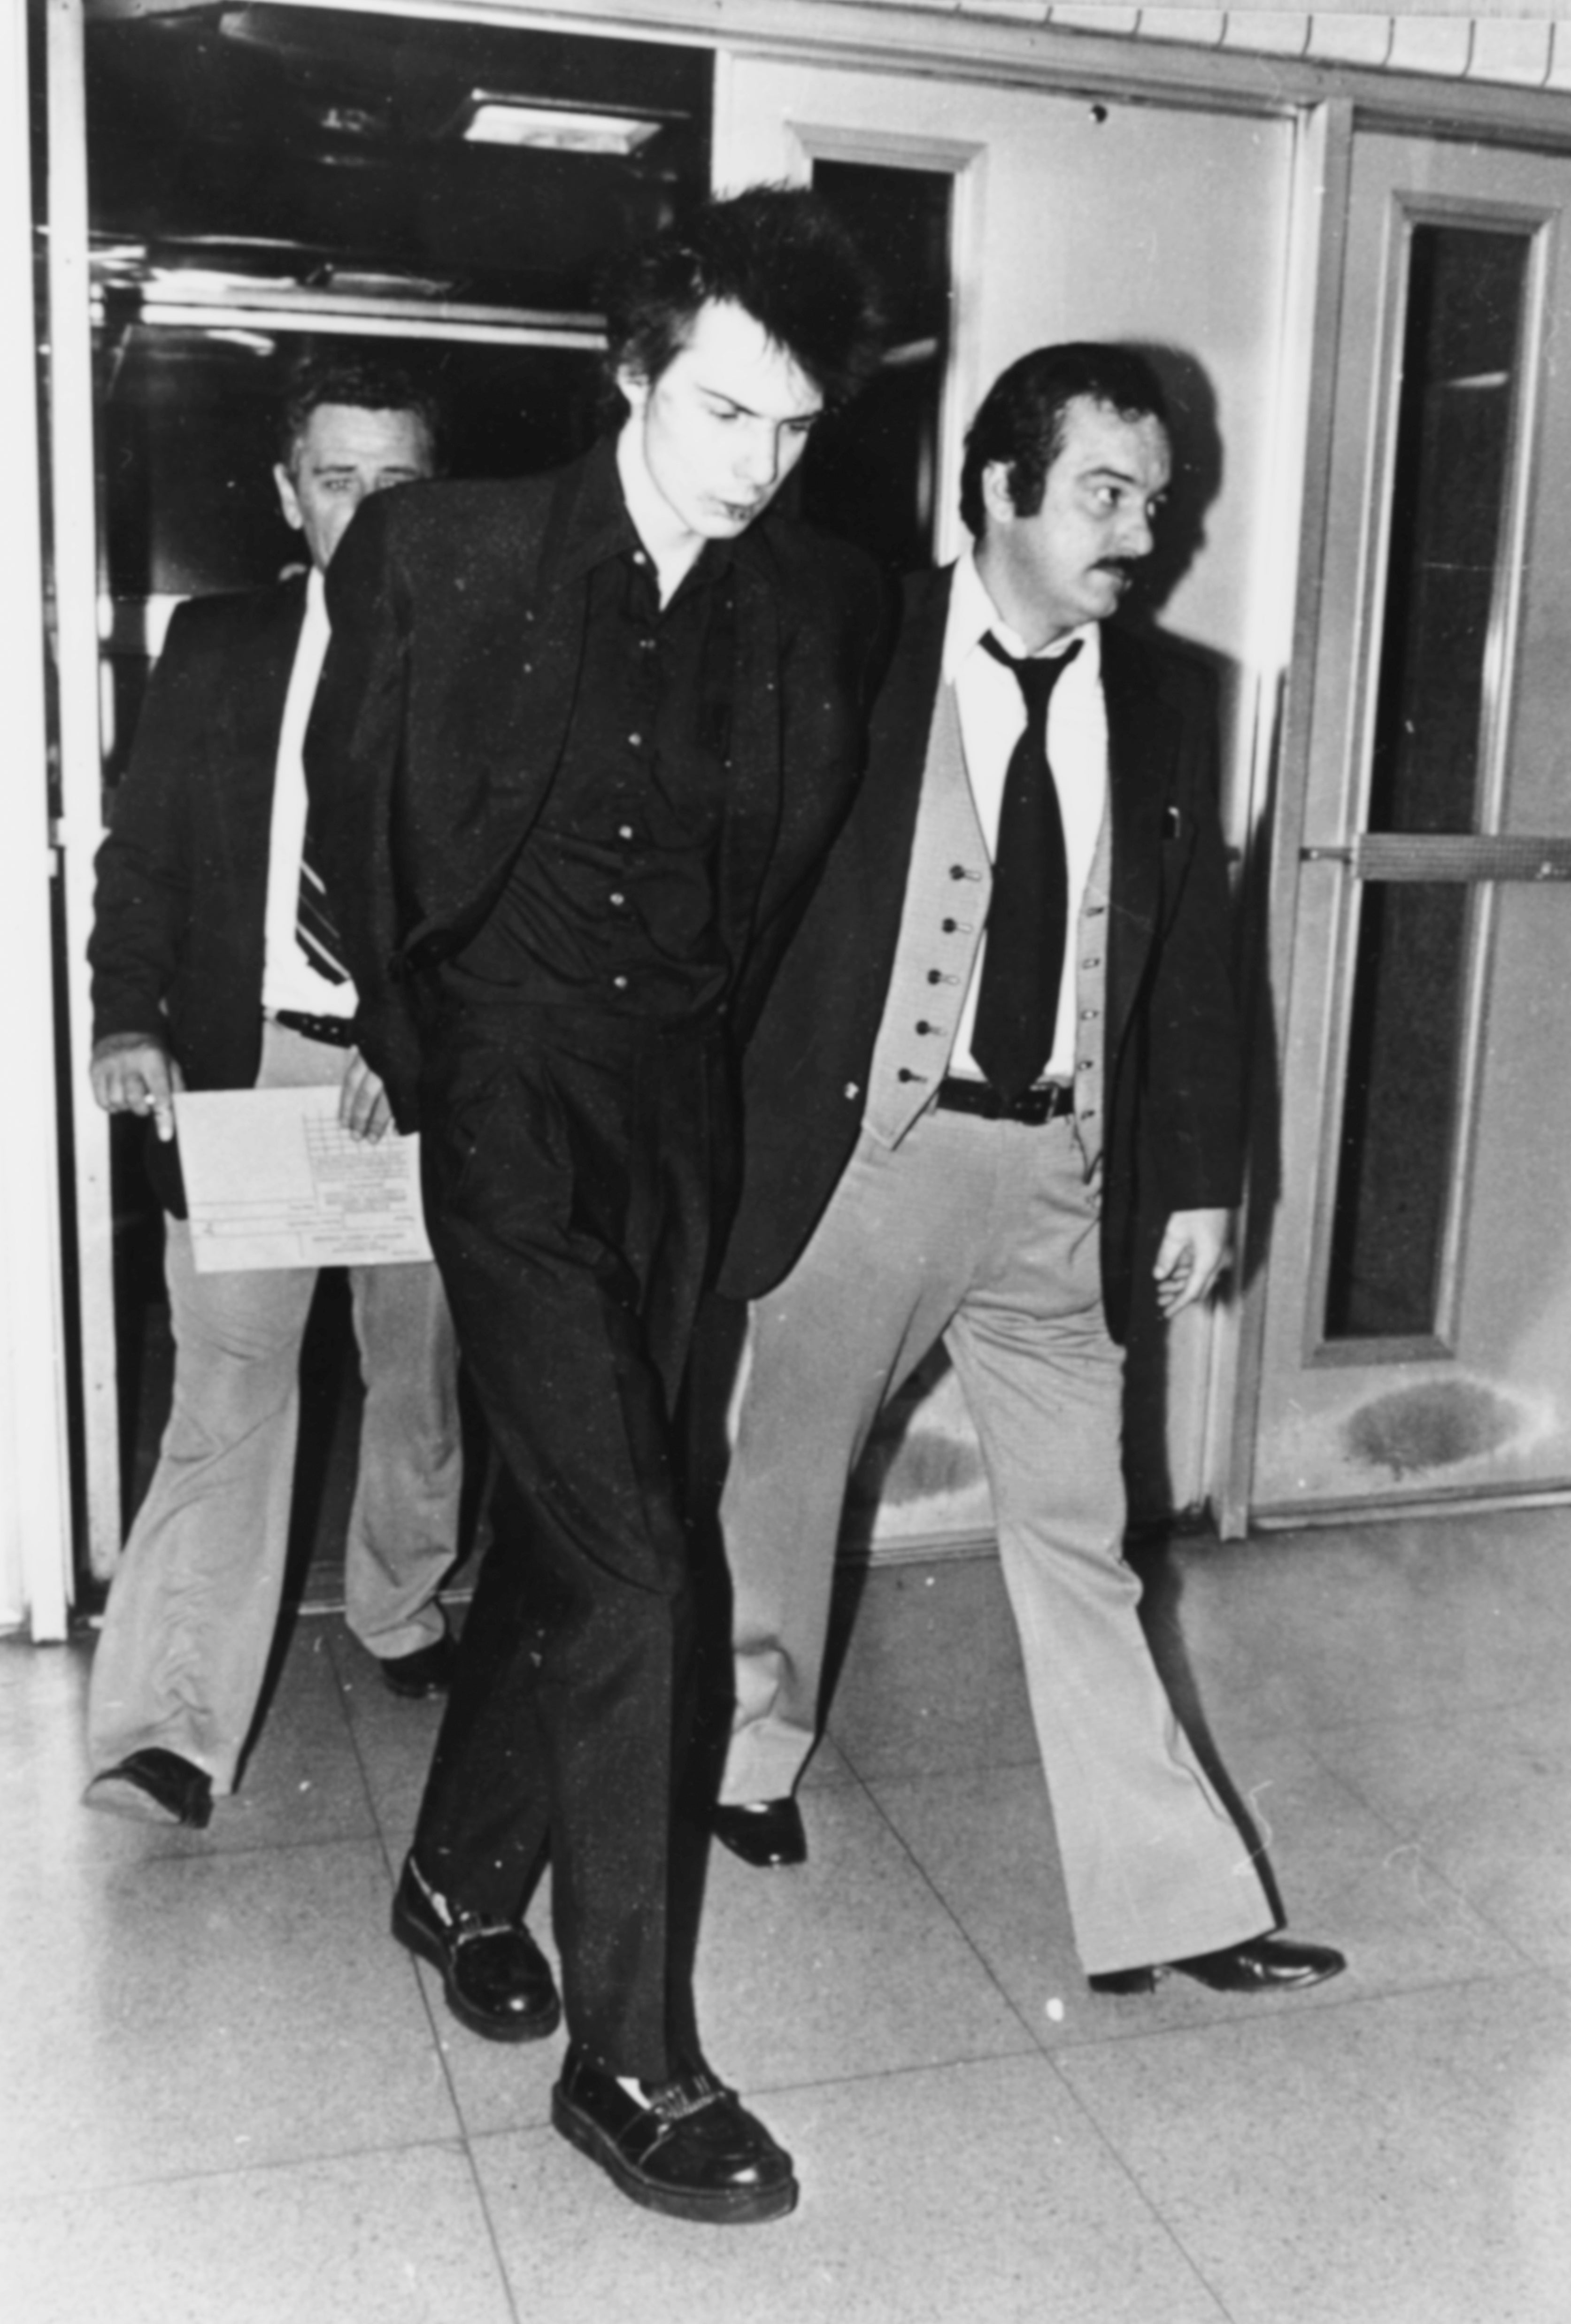 Sid Vicious is led away in police custody on a charge of murder after his girlfriend Nancy Spungen was found stabbed to death in a hotel room, New York City, November 1978